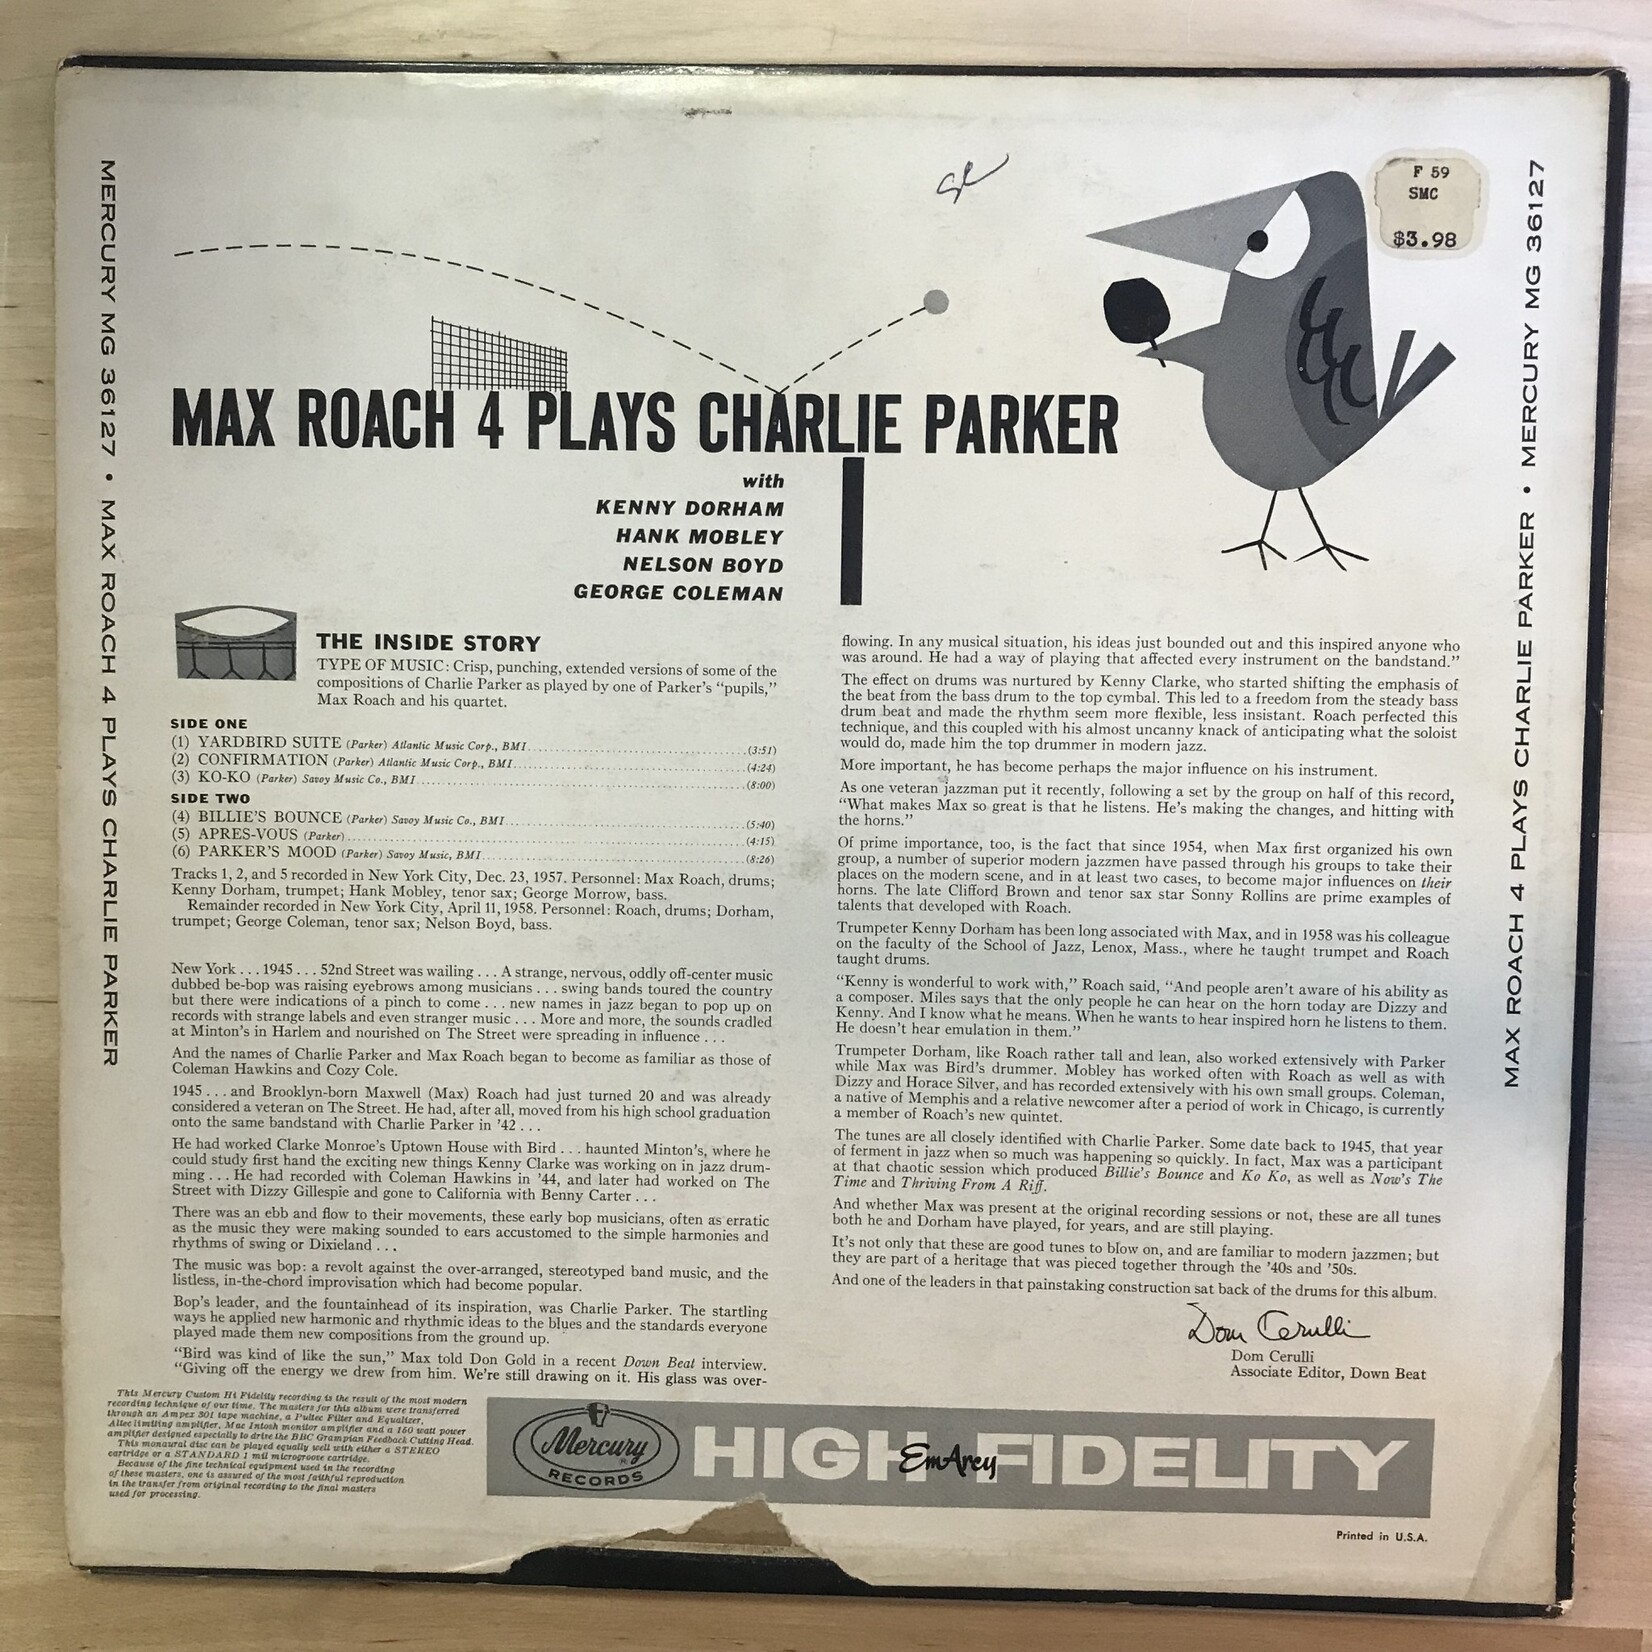 Max Roach - The Max Roach 4 Plays Charlie Parker - MG36127 - Vinyl LP (USED)